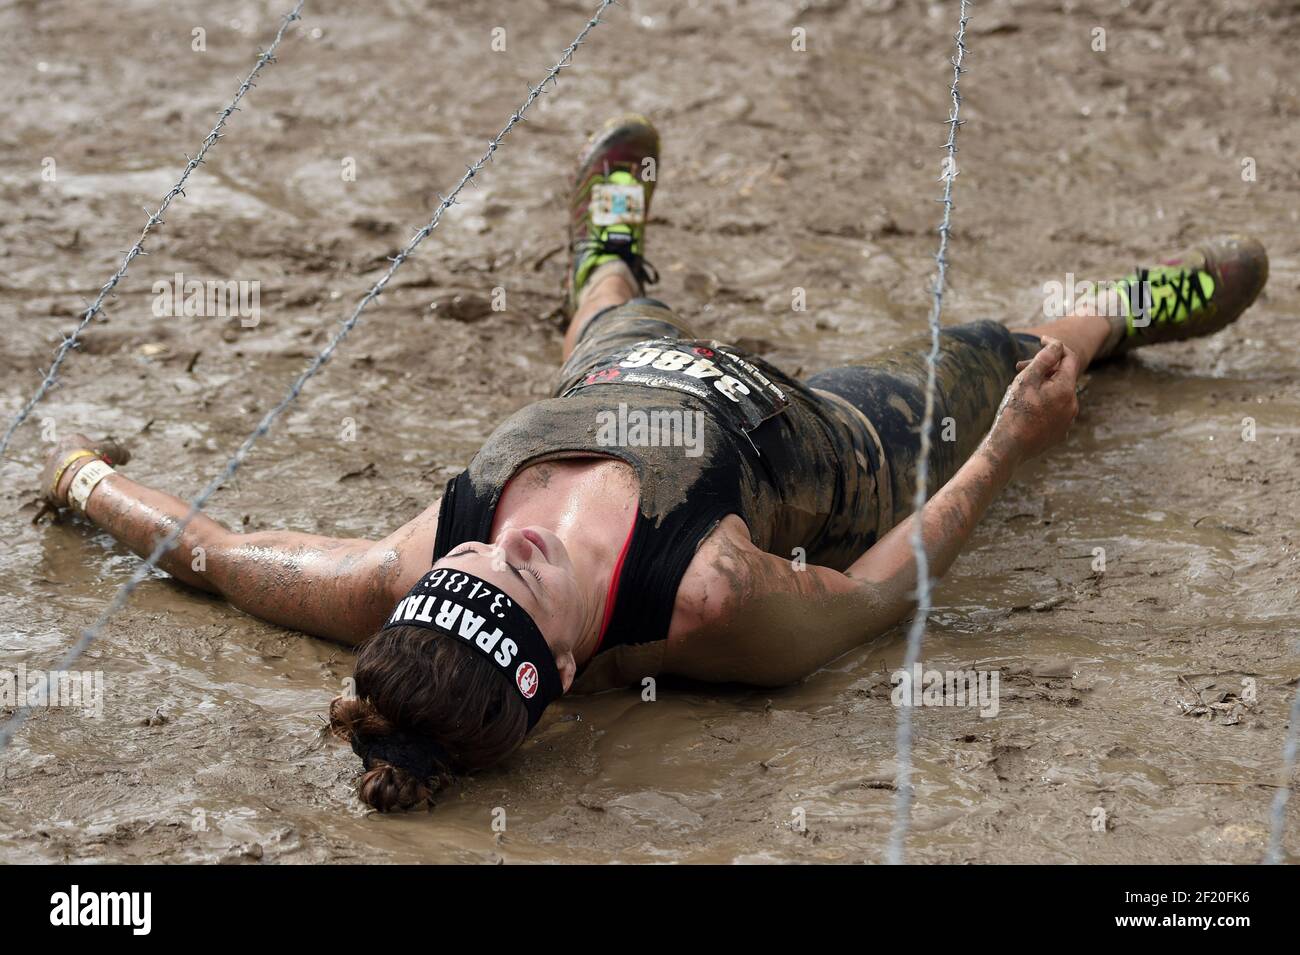 Runner during the Reebok Spartan Race in Jablines, on September 19, 2015.  The Spartan Race is a race in the mud with multiple obstacles. Photo  Philippe Millereau / KMSP /DPPI Stock Photo - Alamy